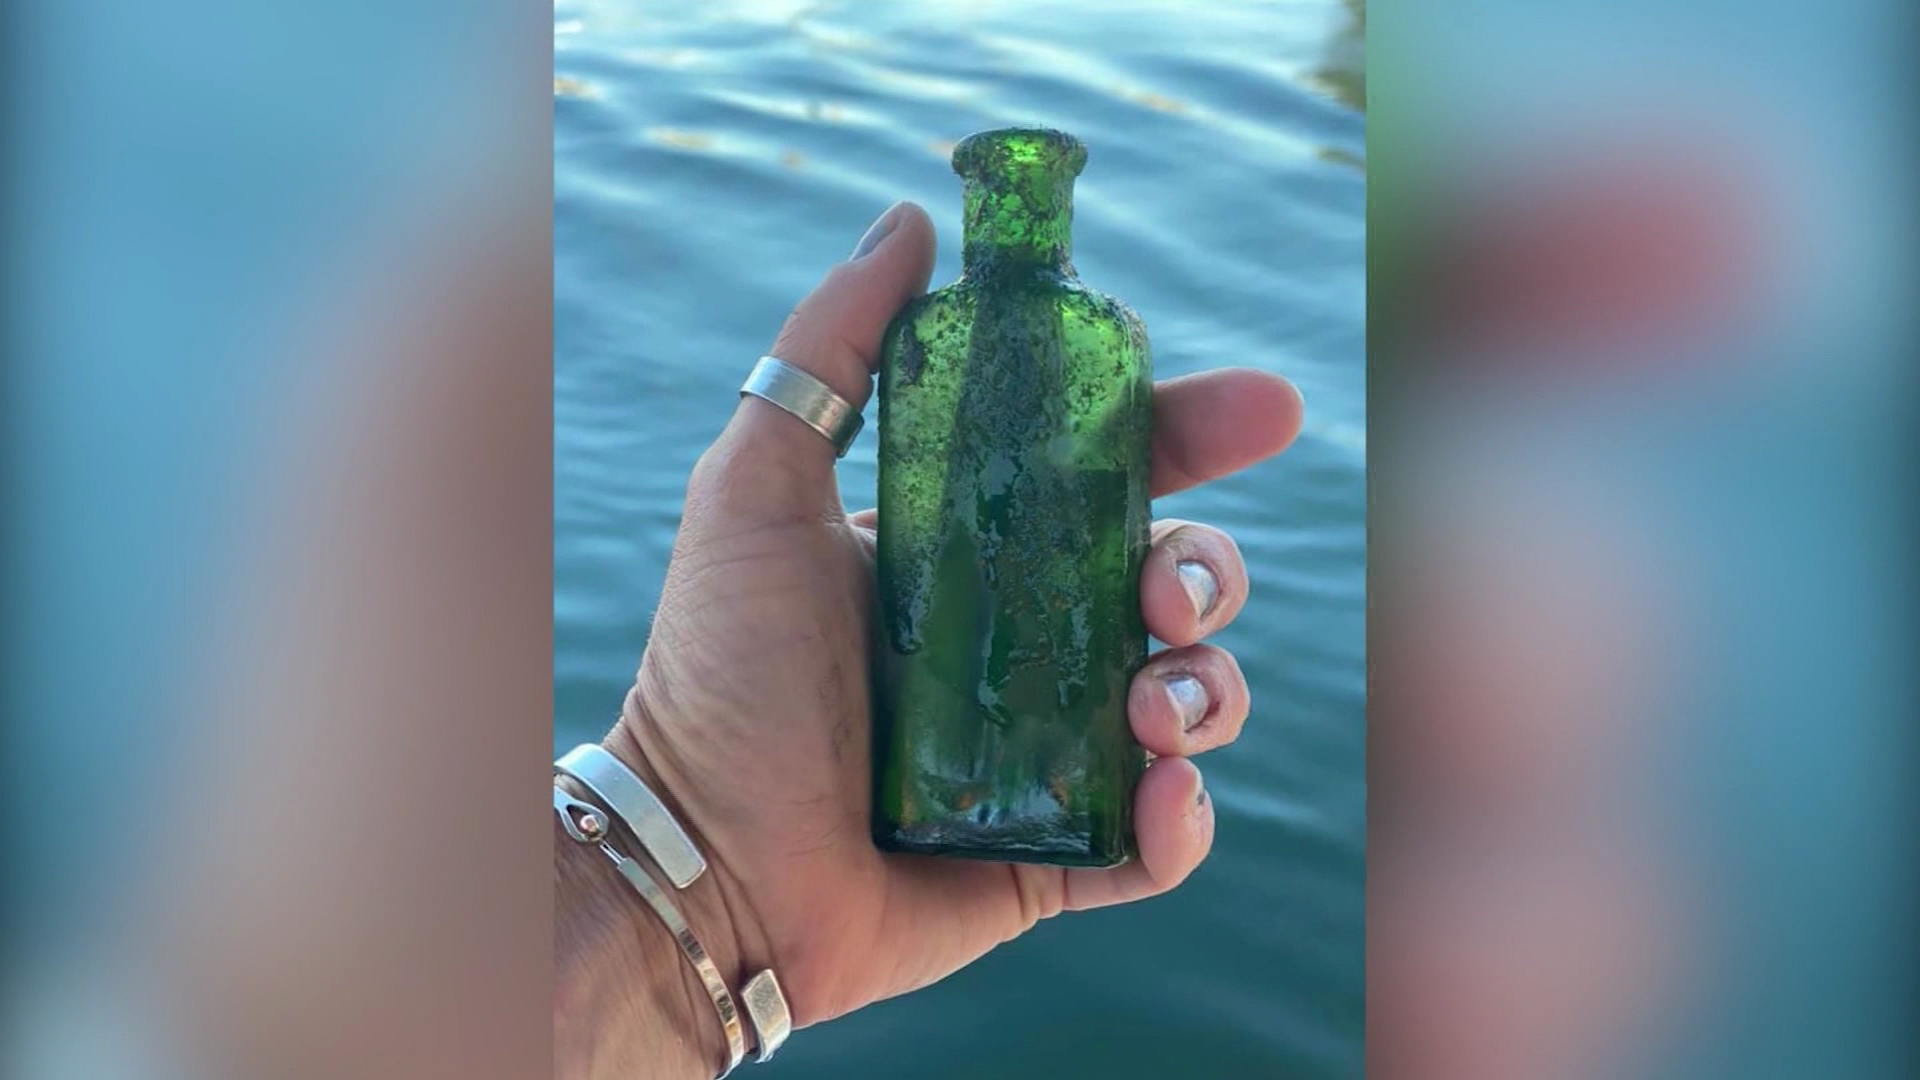 95-Year-Old Message In A Bottle Found!, boat captain Jennifer Dowker, News Without Politics, NWP, amazing non opinionated news stories